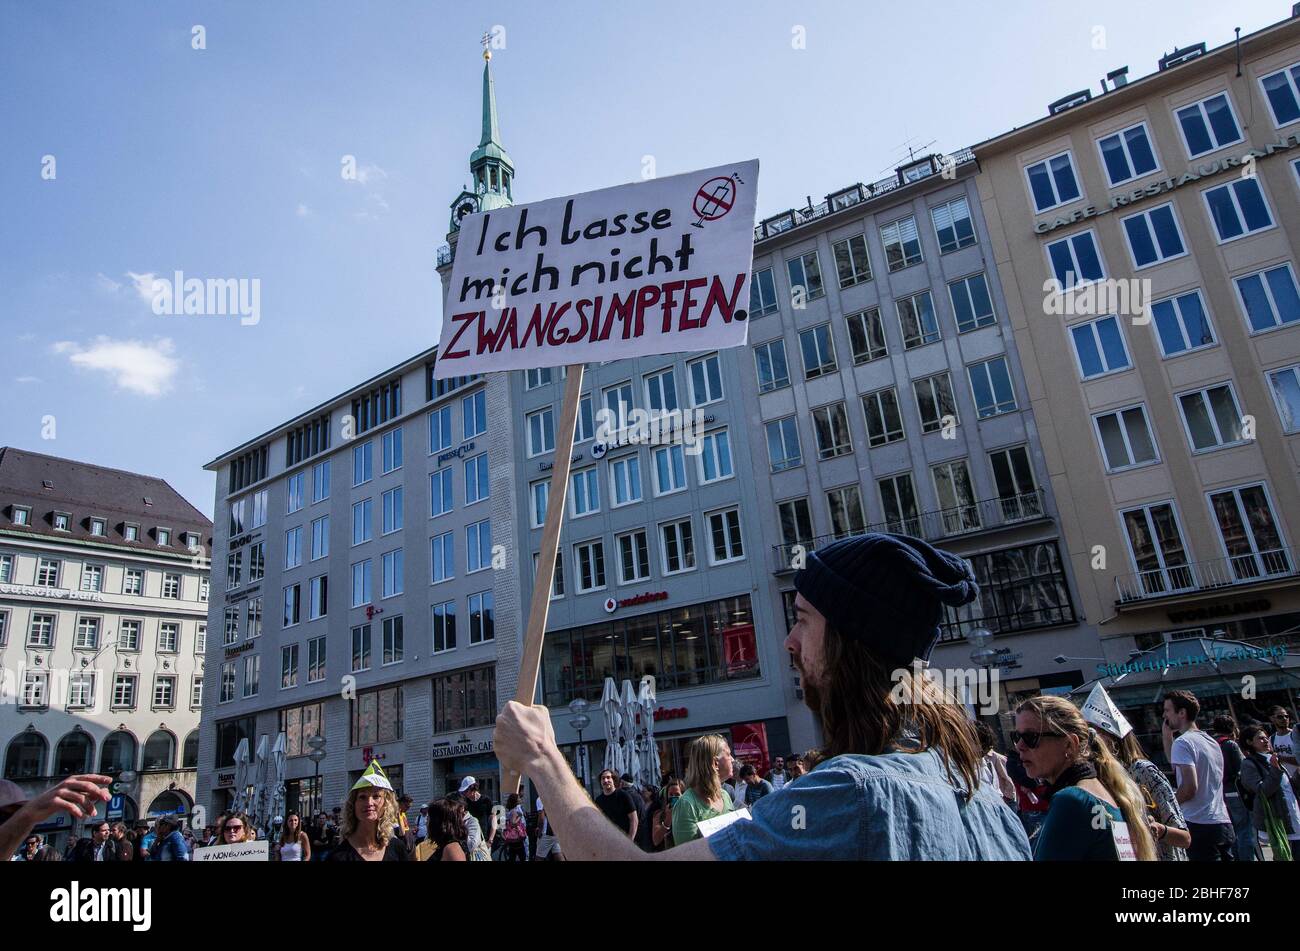 Munich, Bavaria, Germany. 25th Apr, 2020. An anti-vaxxer displays a sign opposing vaccines at a QAnon-like demo in Munich, Germany. Organized in Telegram chats by conspiratorial 'Querfront'' (cross-front) groups, the city of Munich, Germany saw numerous anti-state 'Corona Parties'' as under mottos such as 'Demonstration fuer die Erhaltung der Grundrechte'' (Demonstration for the Upholding of Basic Rights) and 'Fuer unsere Freiheit, unsere Grundrechte und unsere Selbstbestimmung'' (Demonstration for our Freedom, Basic Rights, and Self-Determination). Numerous right-extremists, Ver Stock Photo